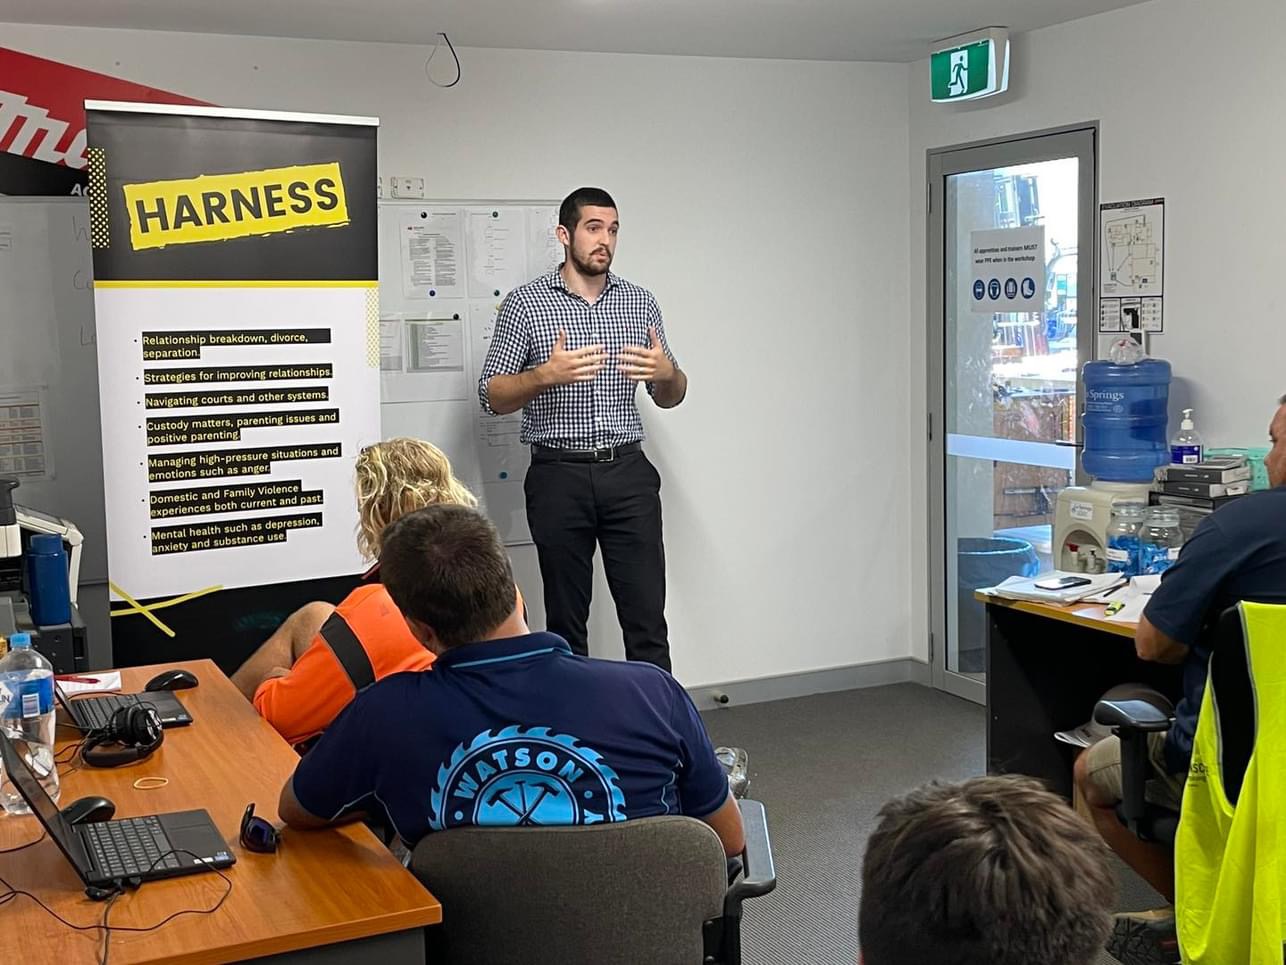 Harness program counsellor delivering toolbox talk in Capalaba Training centre